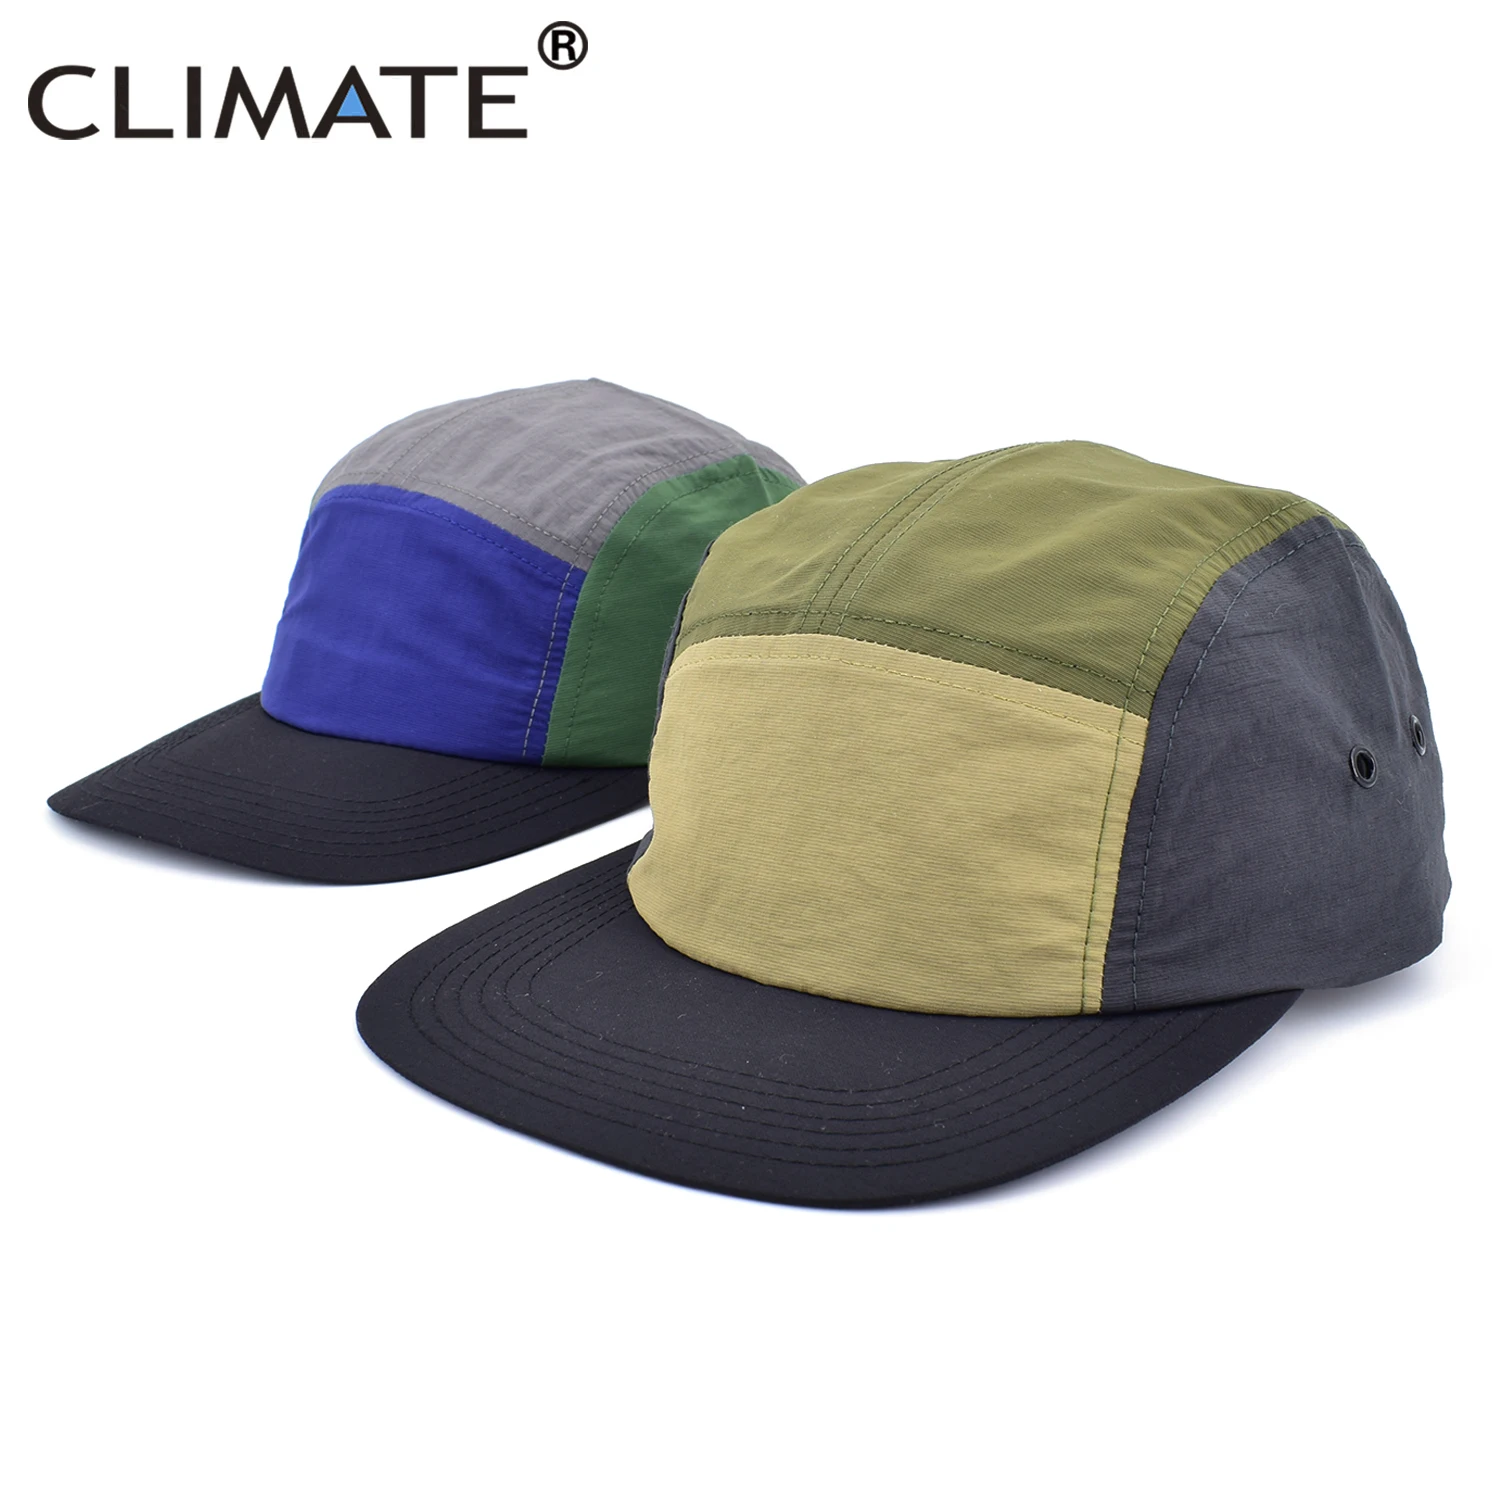 CLIMATE Quick Dry 5 Panel Baseball Cap 5 Panels Sport Outdoor Breathable Cap Hats Camping Snapback Trucker Hat for Hiking